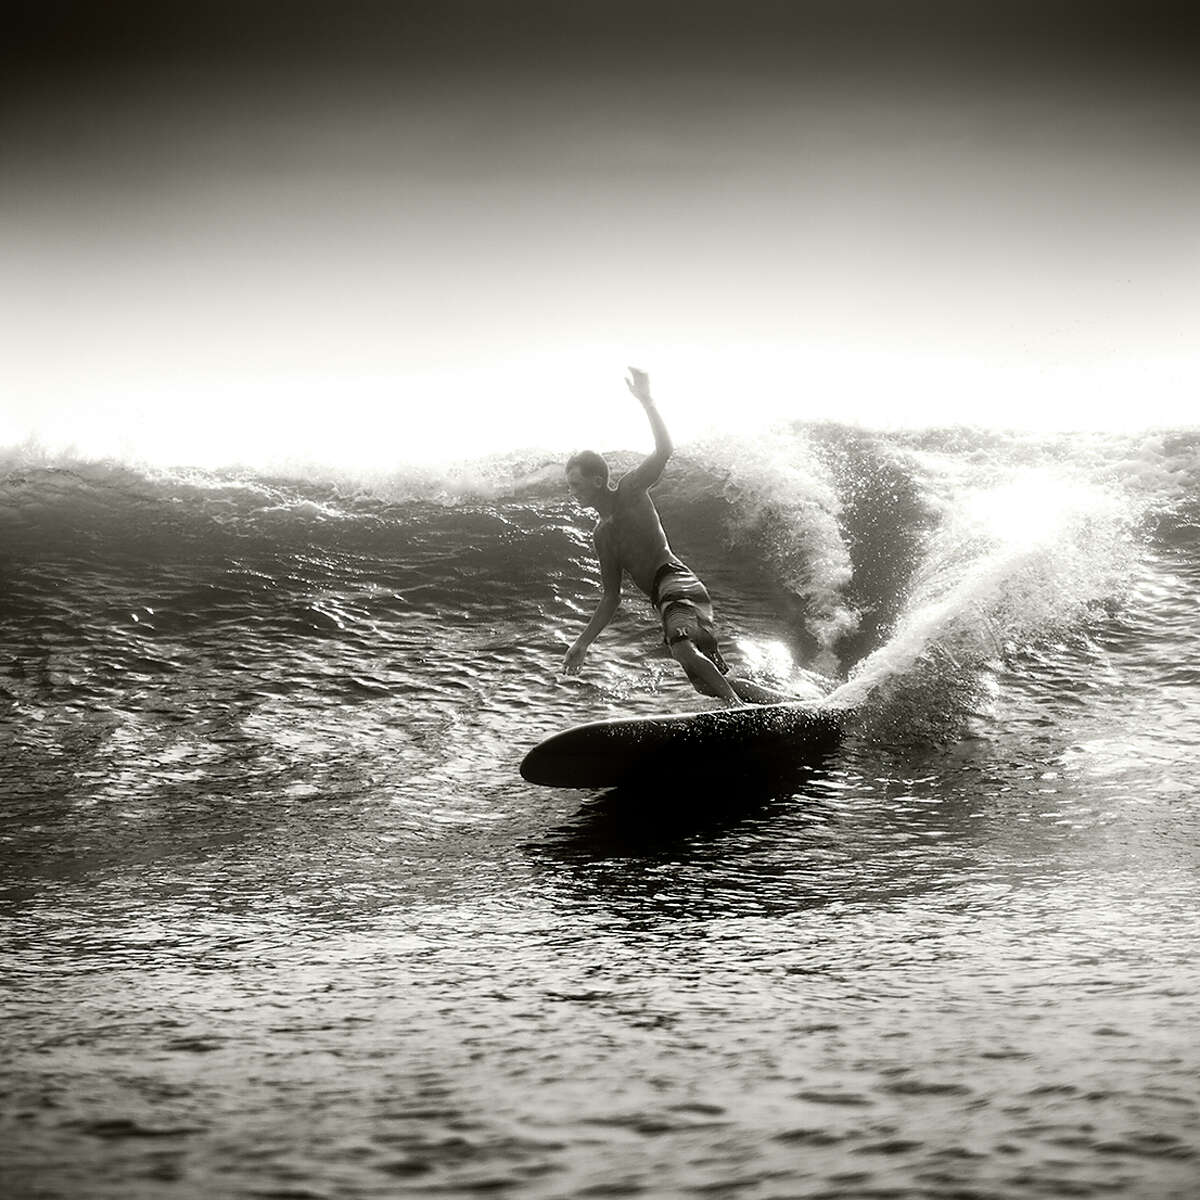 "Hurricane Isaac #1, South Padre Island, 2012" from Kenny Braun's photographic essay "Surf Texas."